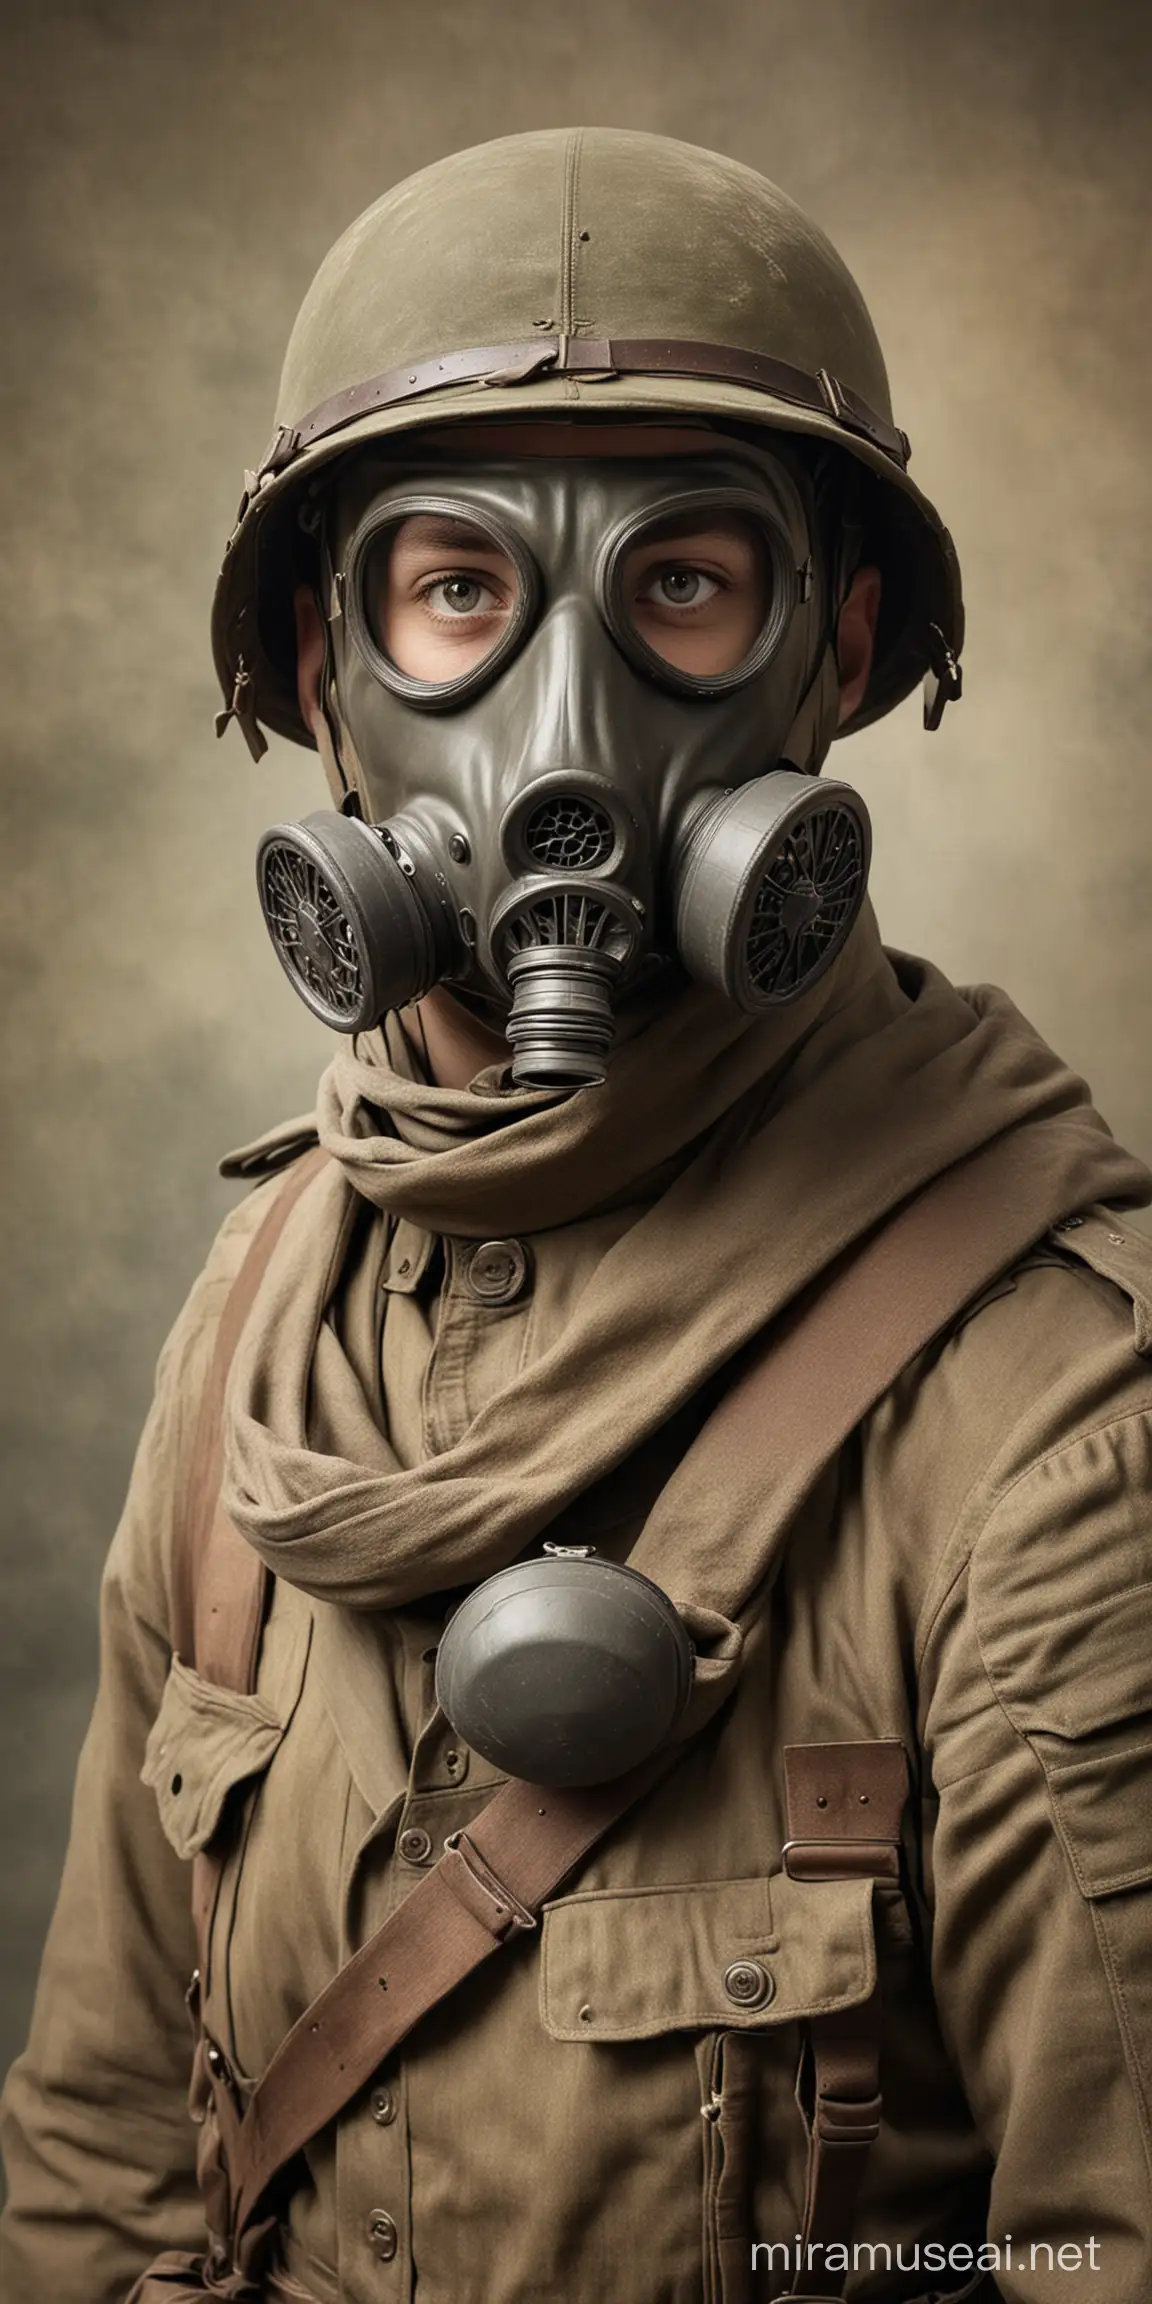 World War One Soldier Wearing Gas Mask with Filter Realistic War Costume